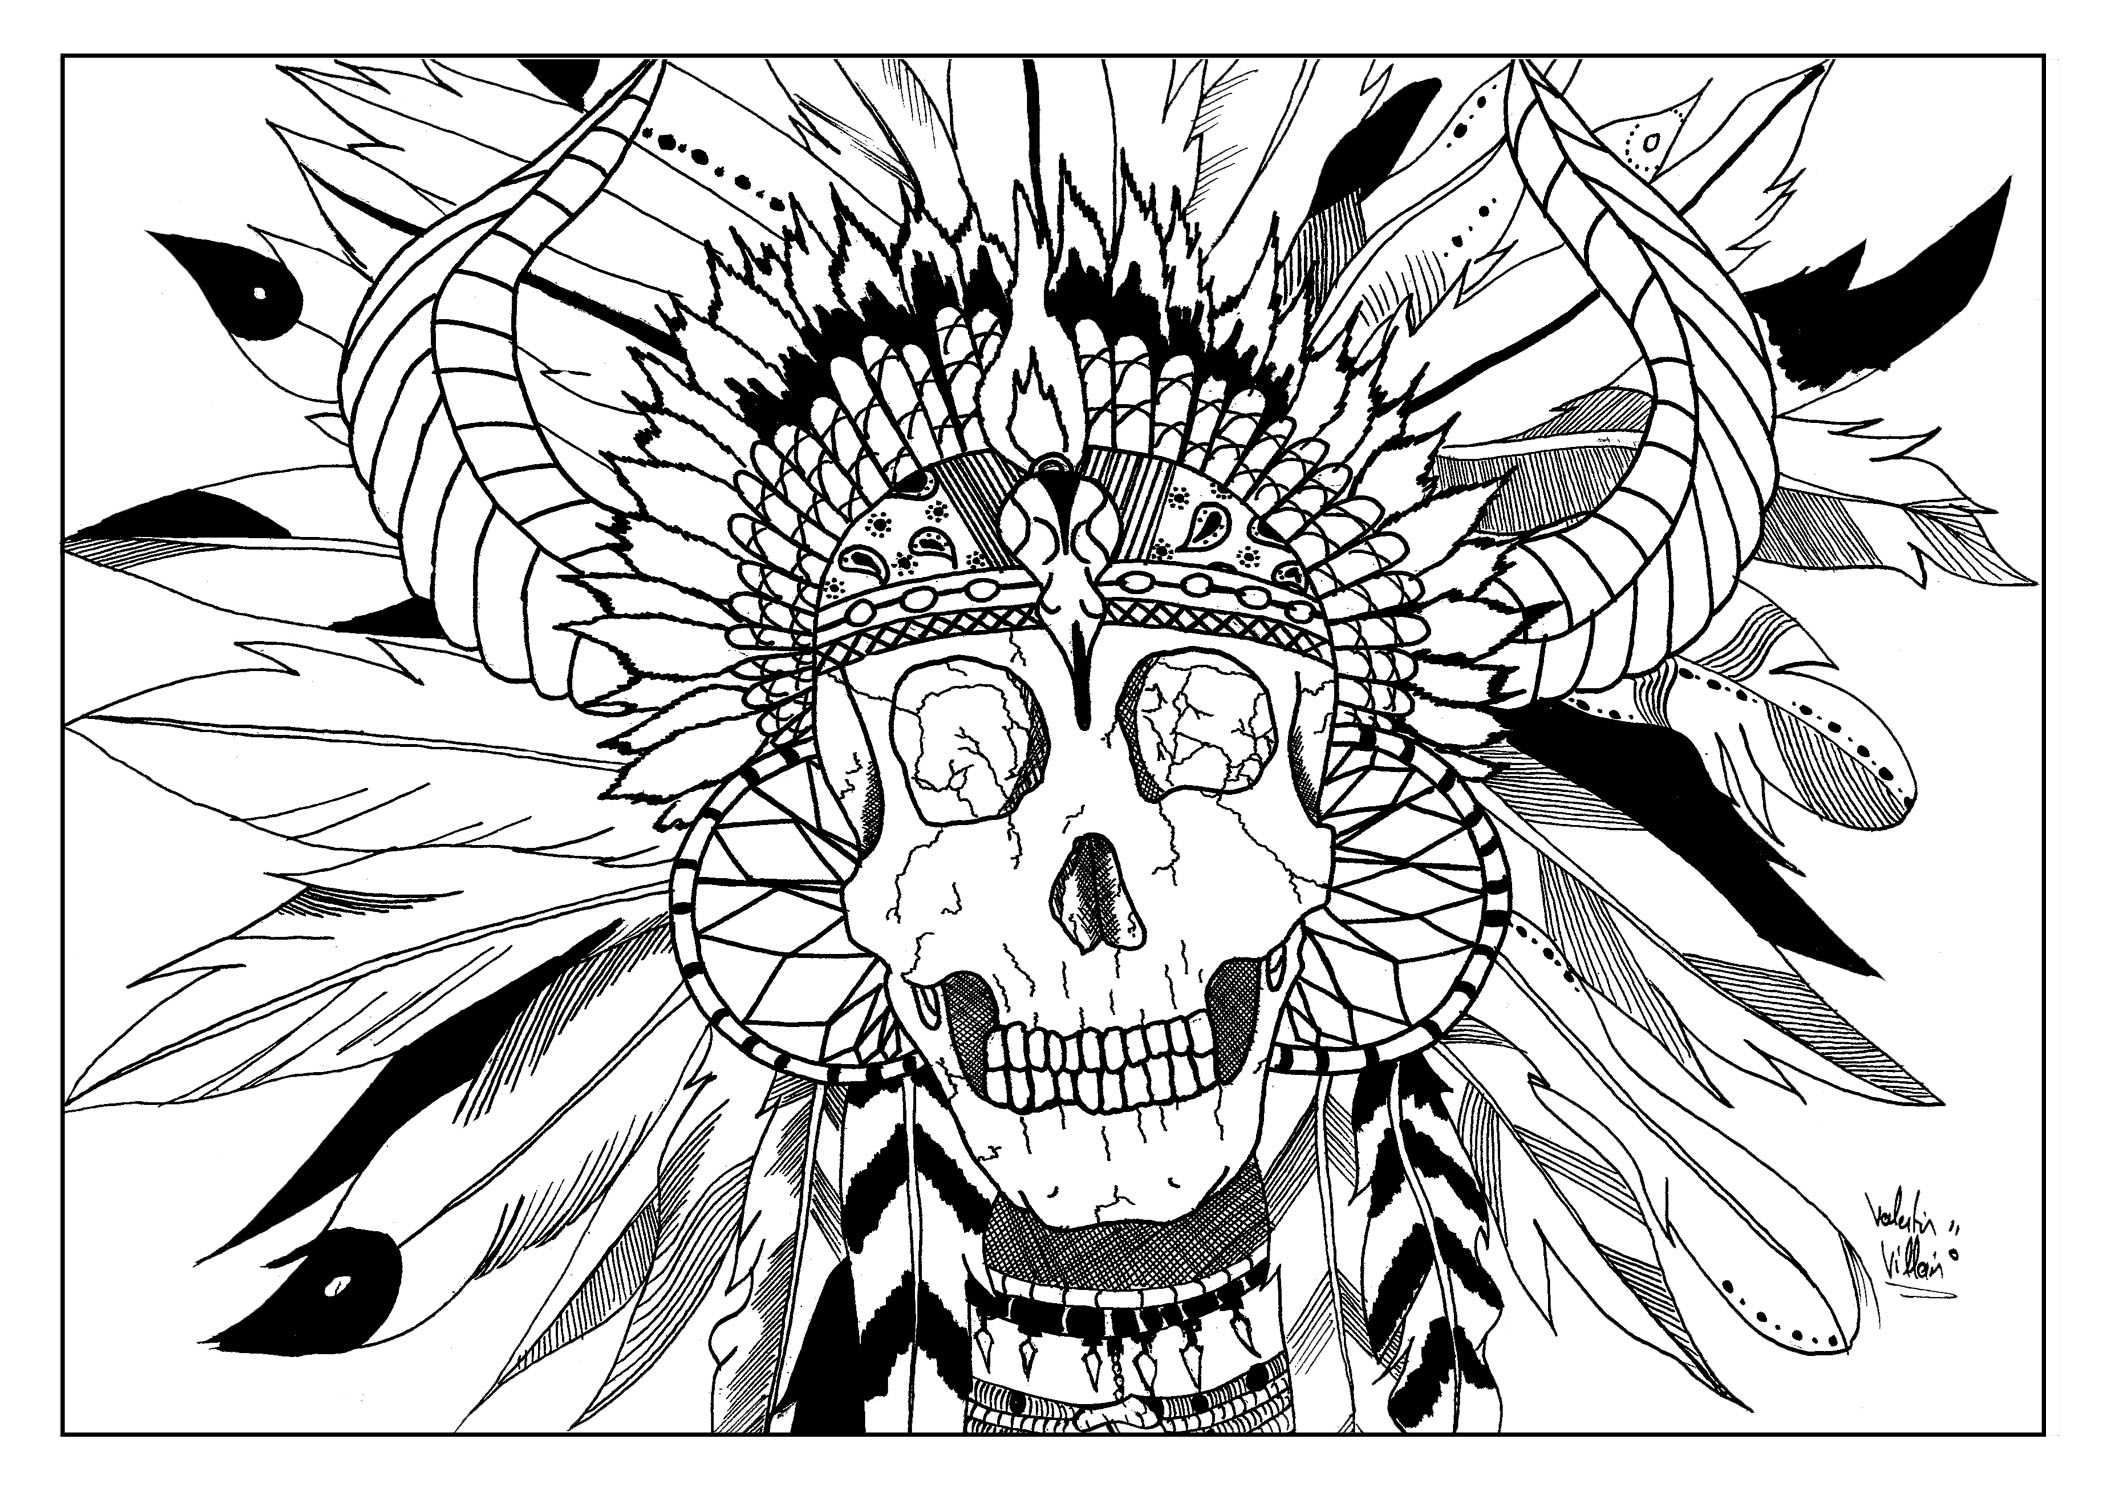 Coloring page of a Native American skull with a headdress waiting to be colored, Artist : Valentin